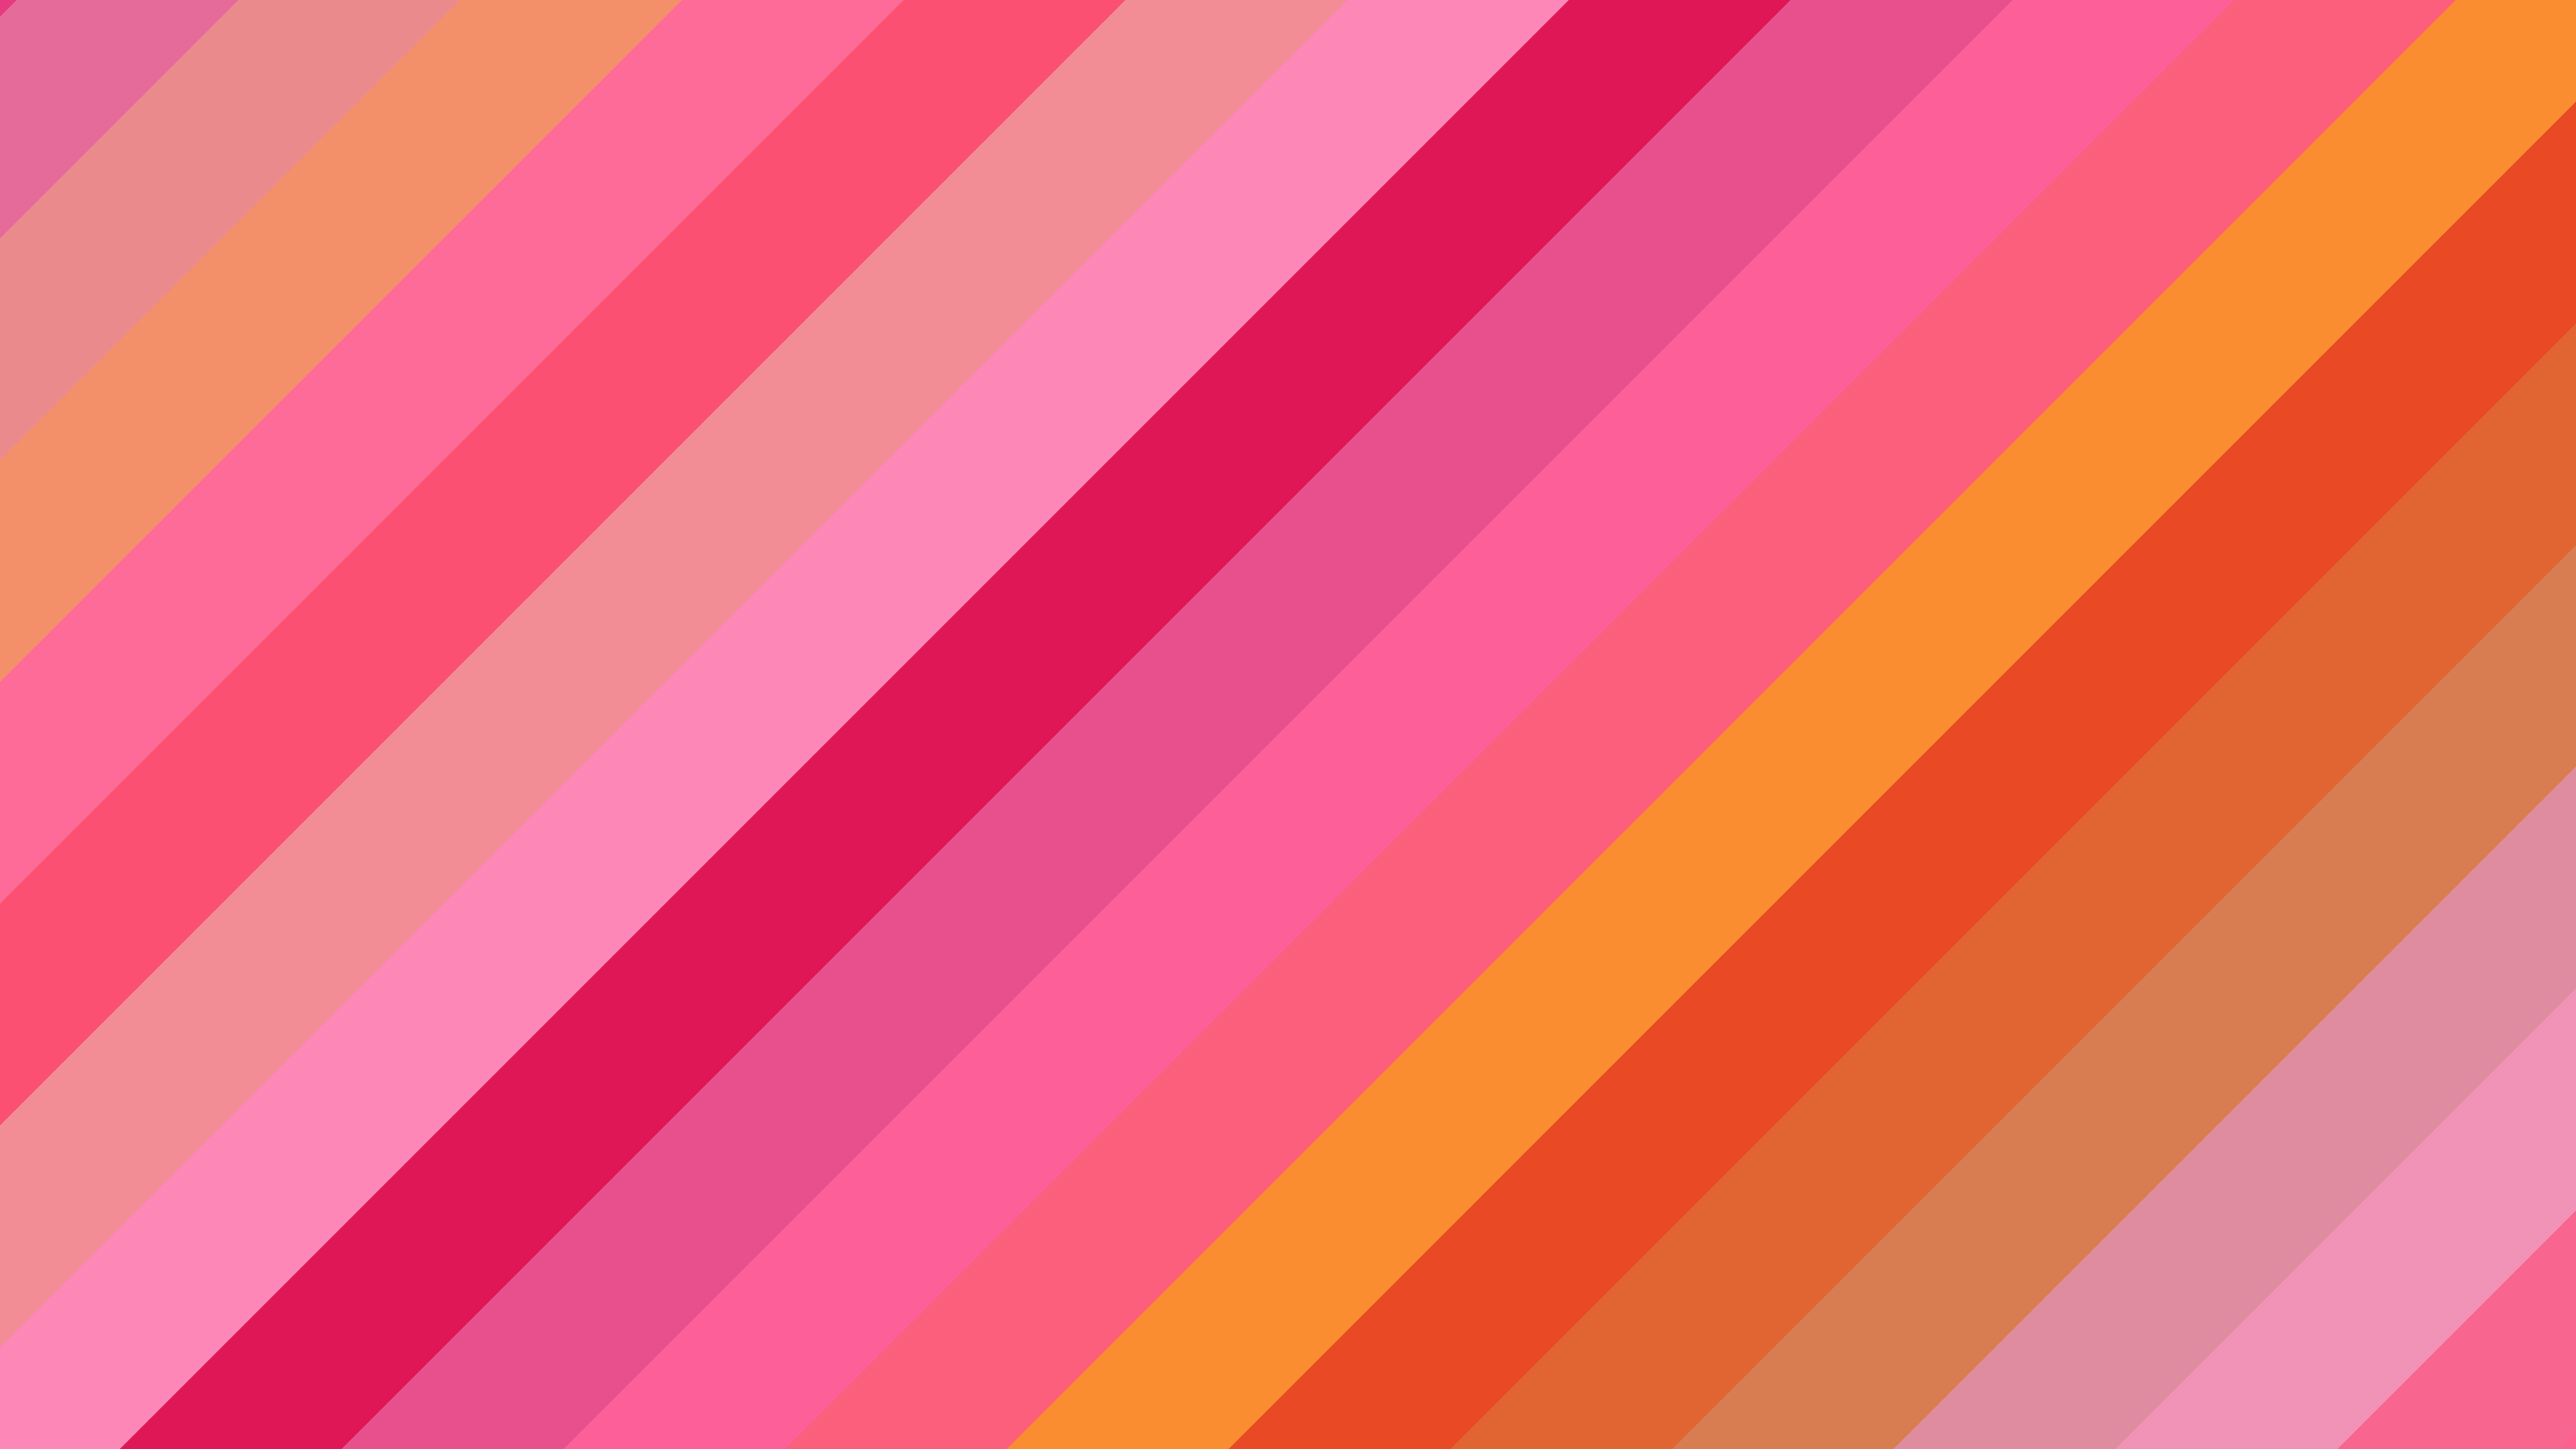 Yellow to pink gradient stripped background Vector Image